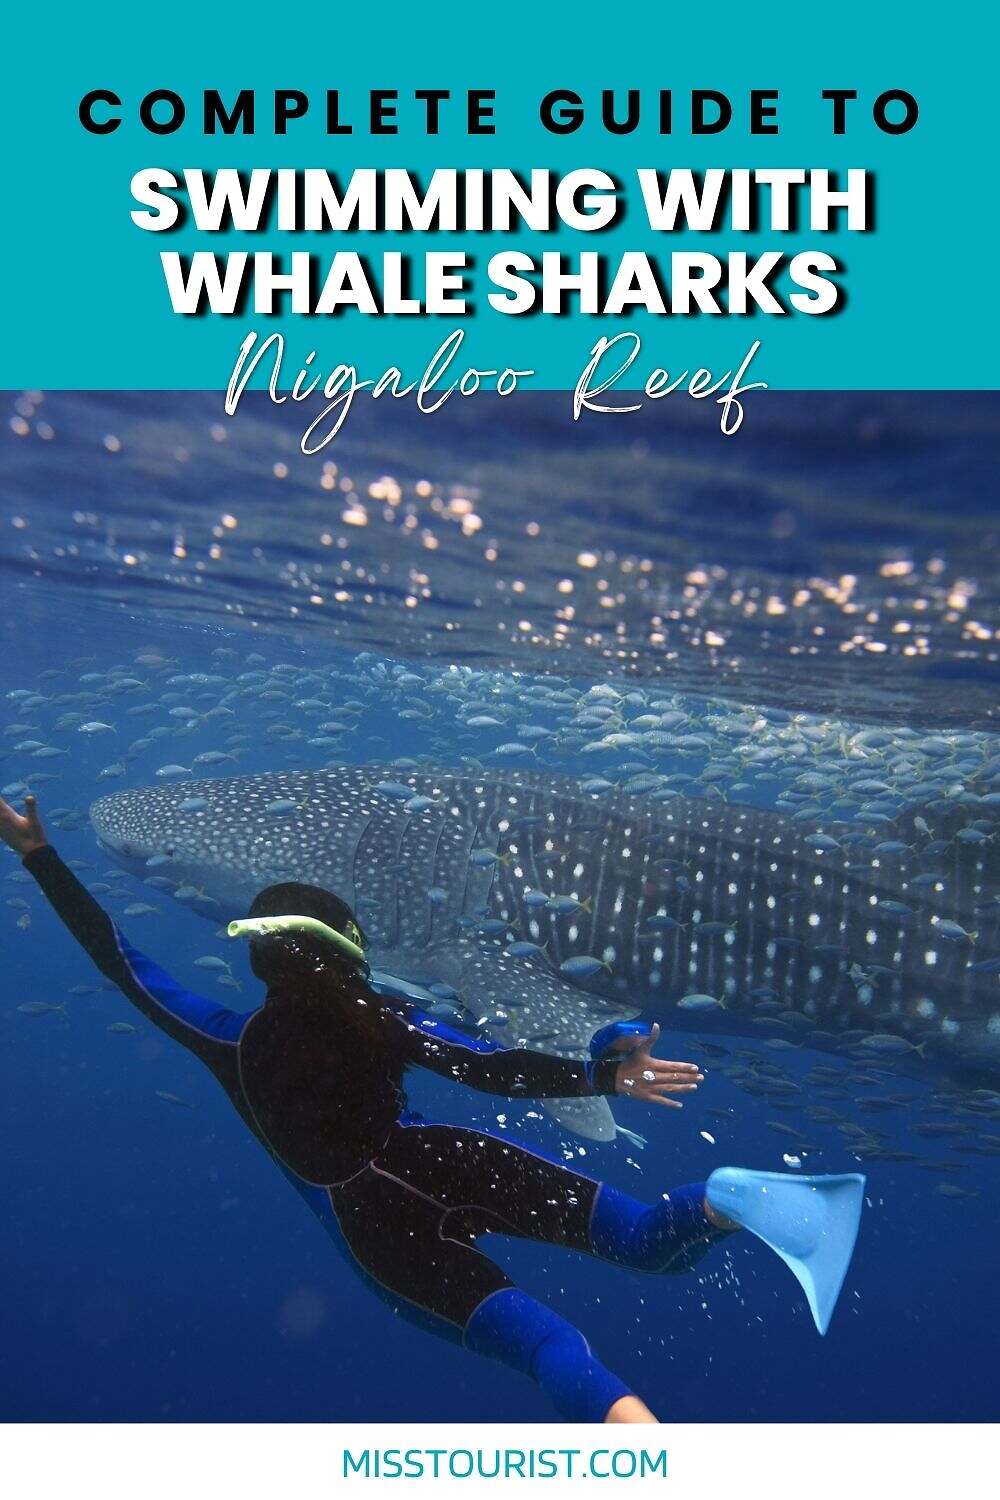 swimming with whale sharks in nigaloo reef pin 1